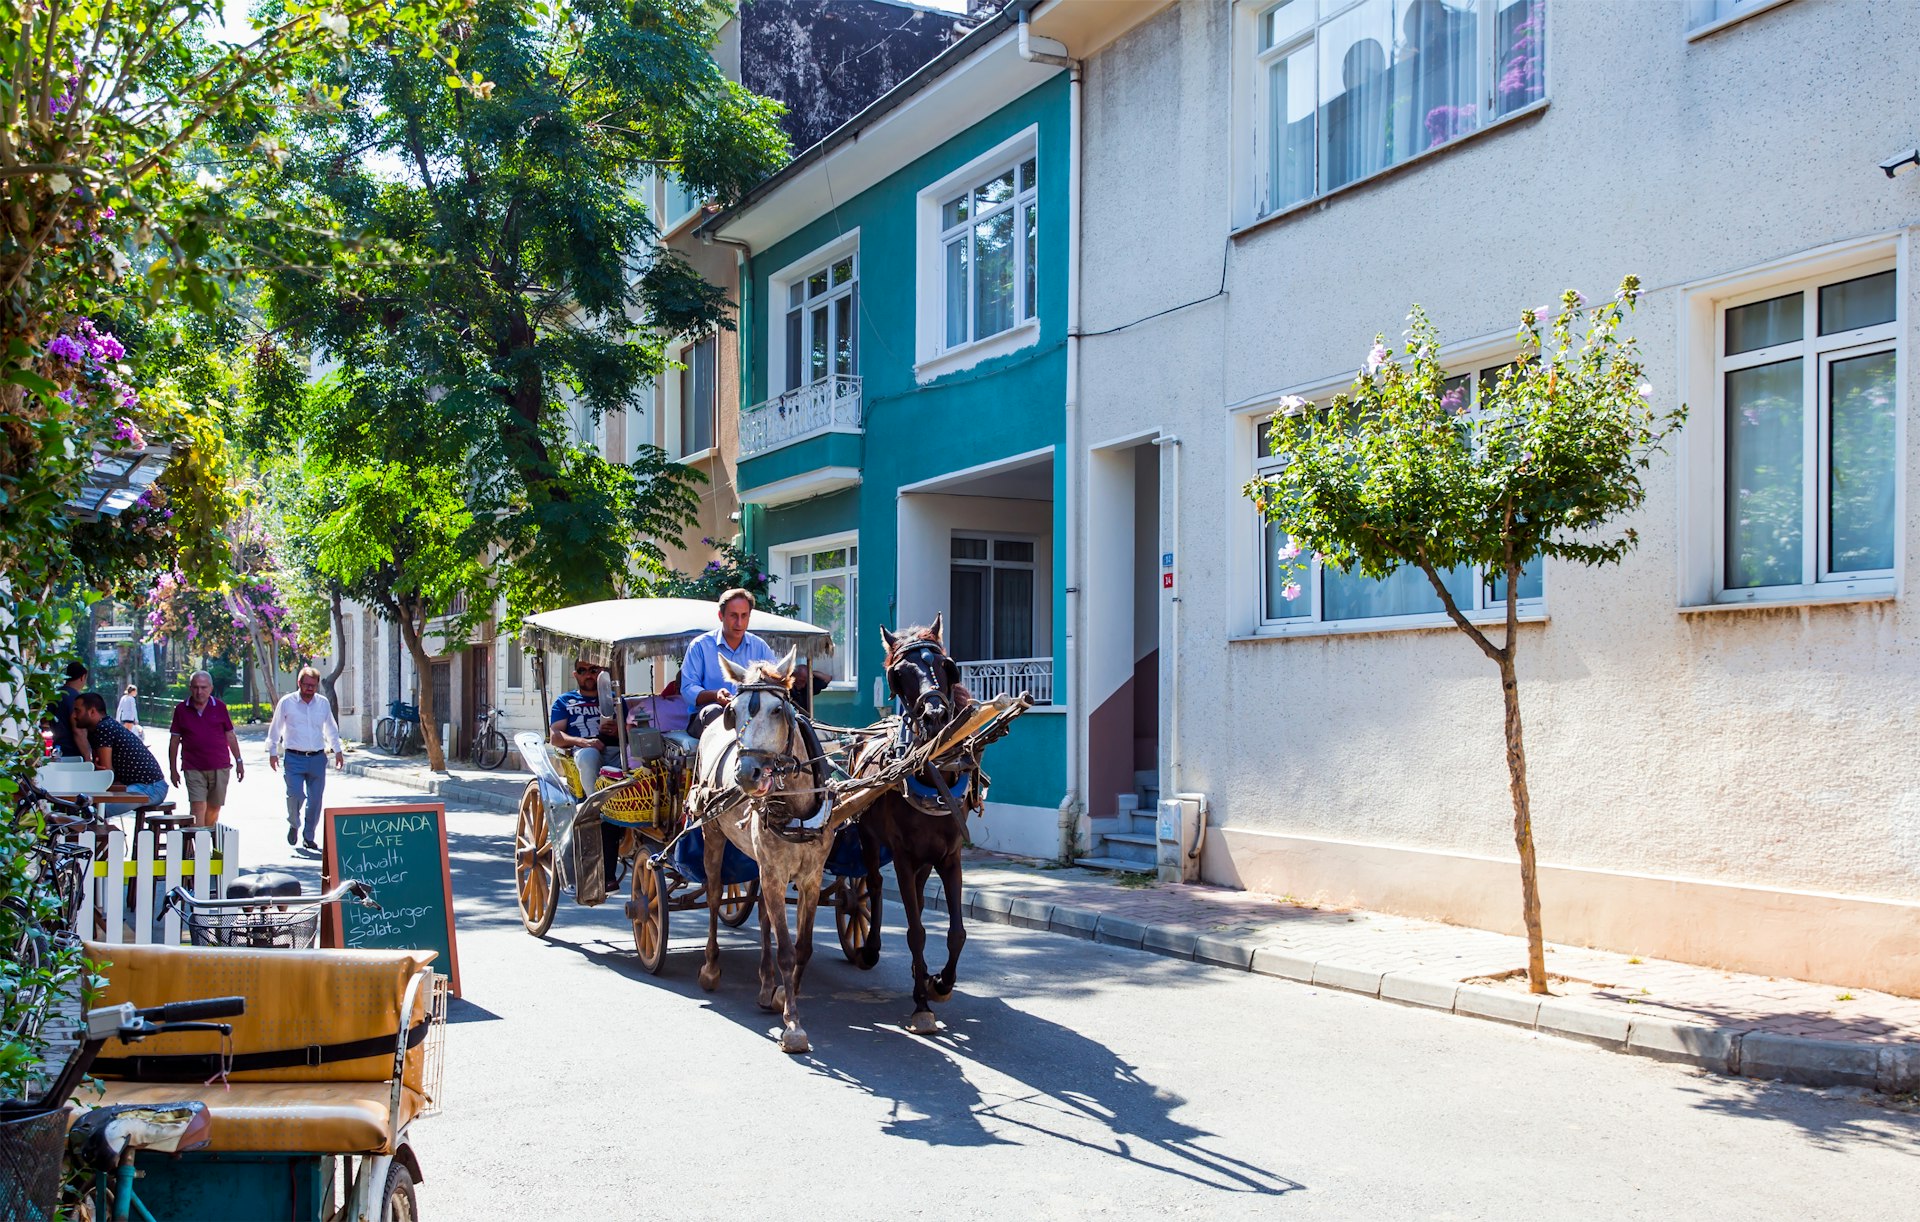 Passengers being driven through the streets by horse and decorated cart in Phaeton on Prince Island Buyukada, Istanbul